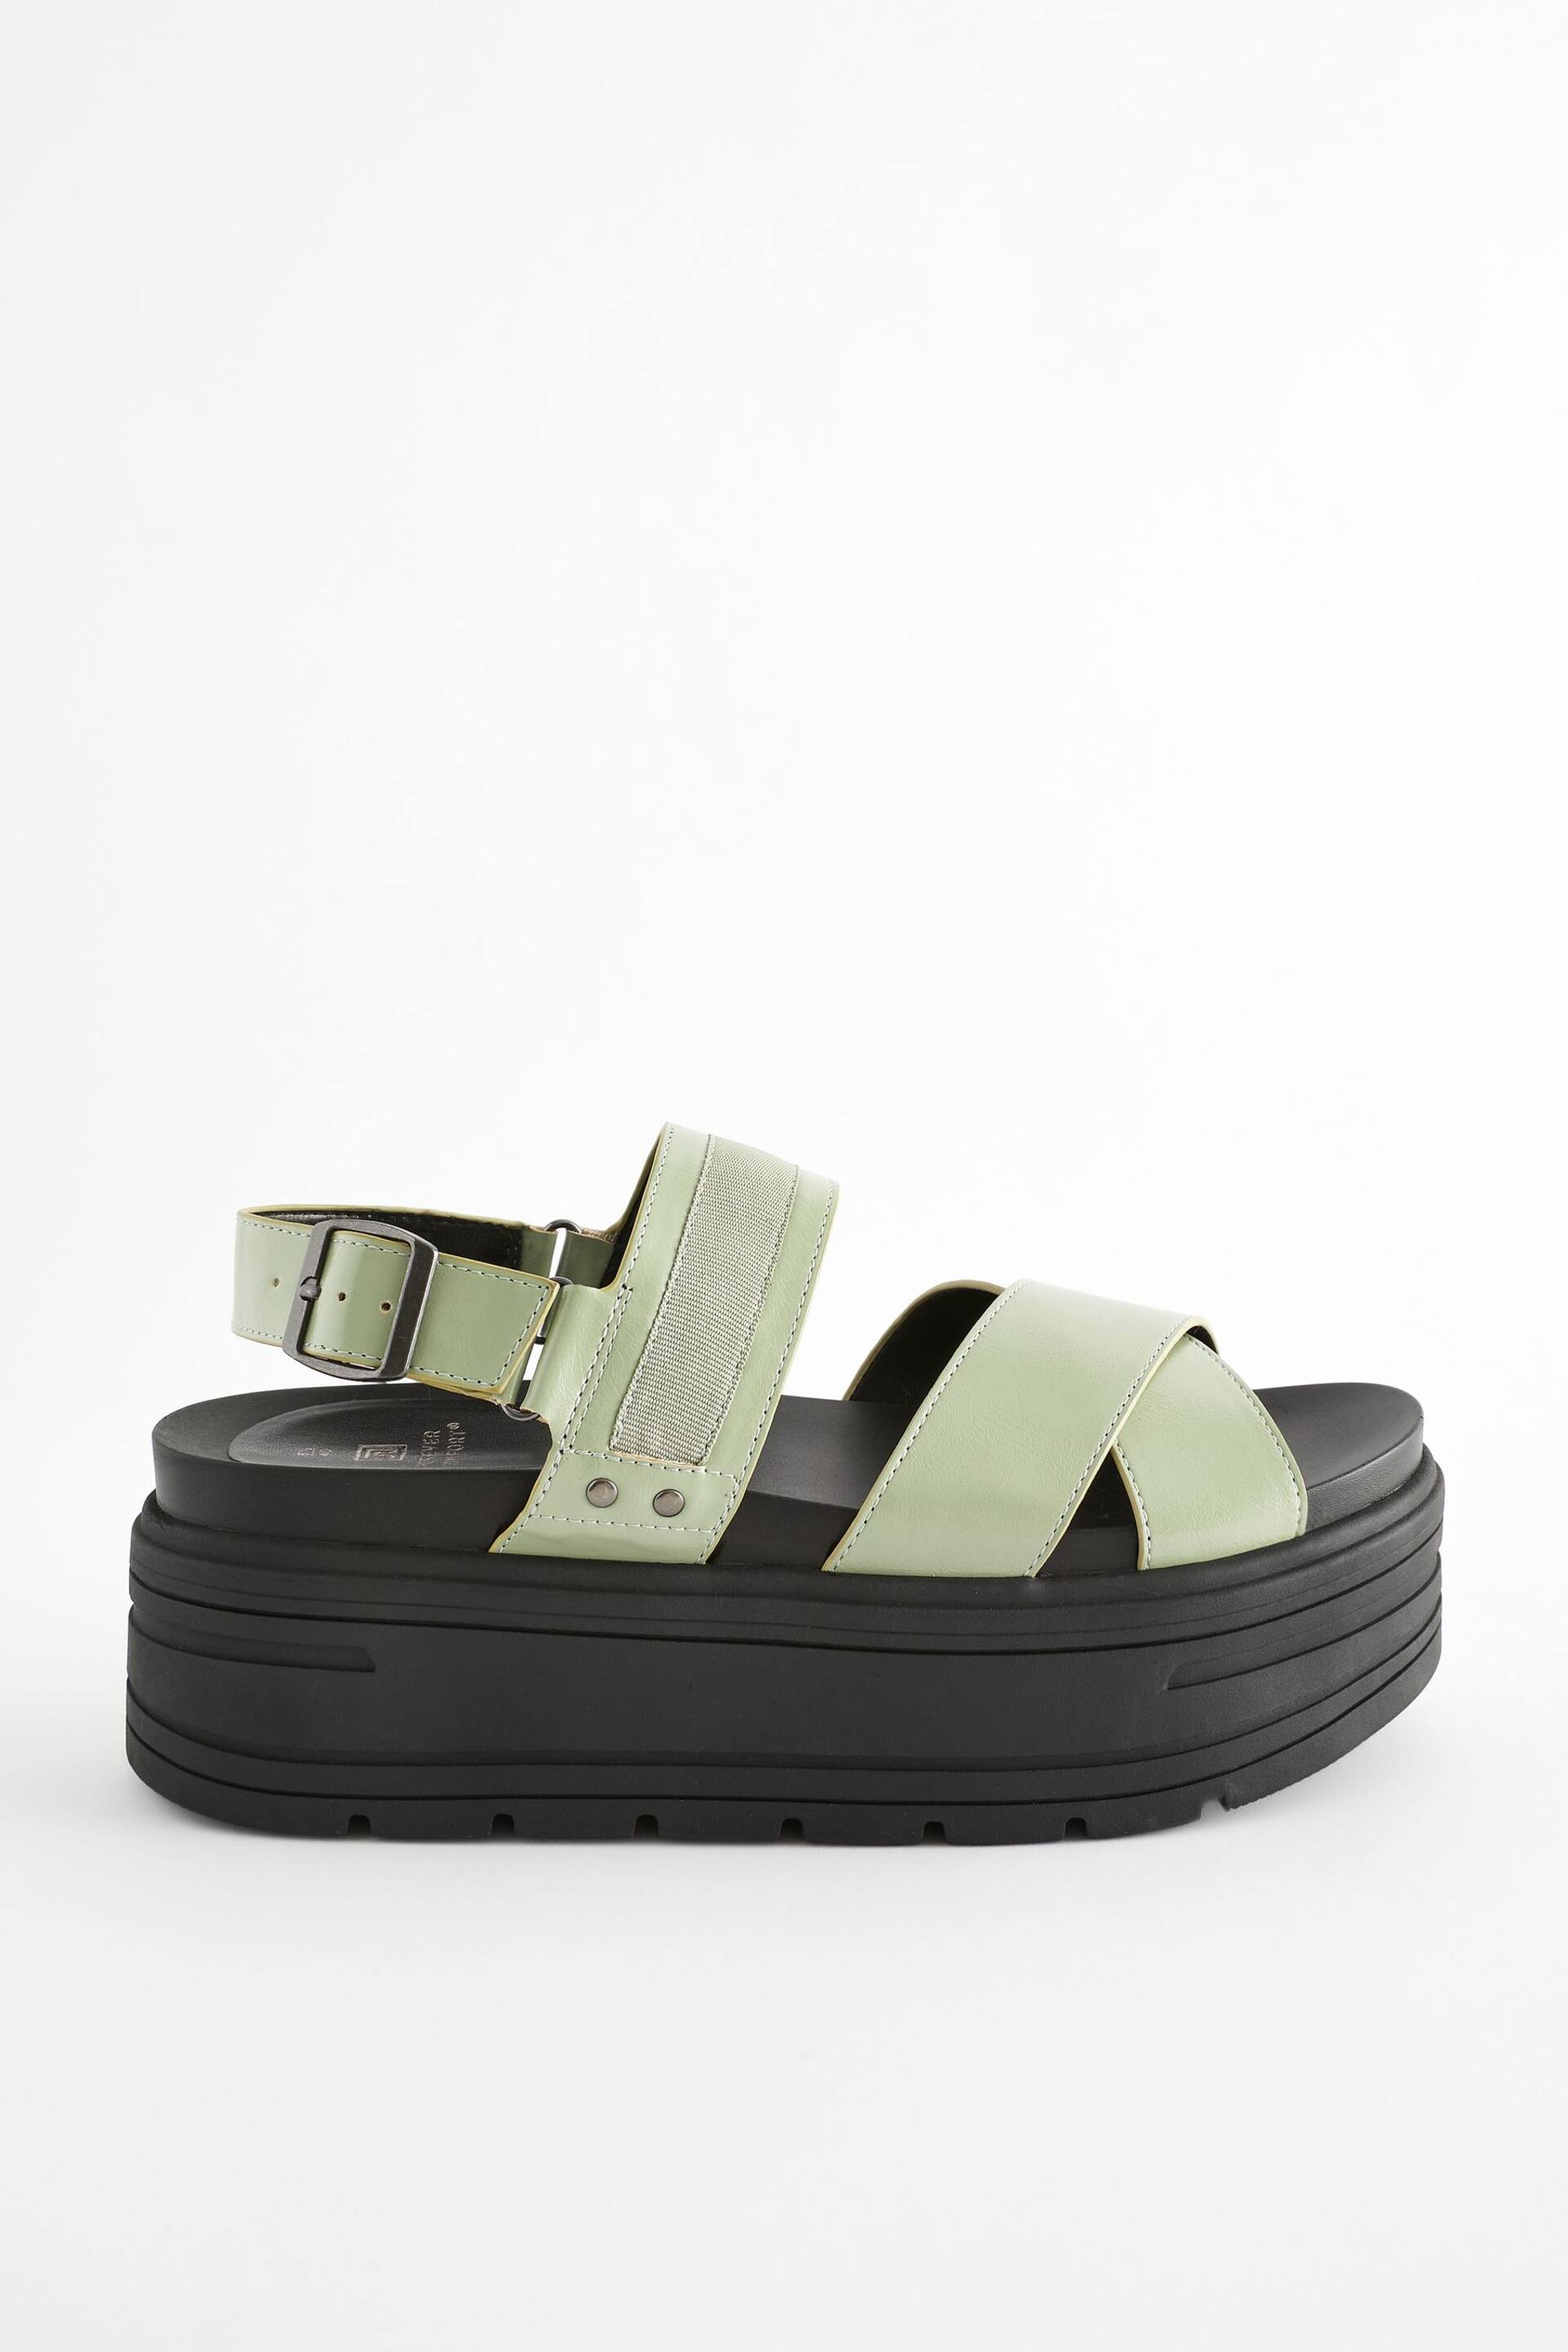 Sage Green Regular/Wide Fit Chunky Wedge Sandals - Image 2 of 5